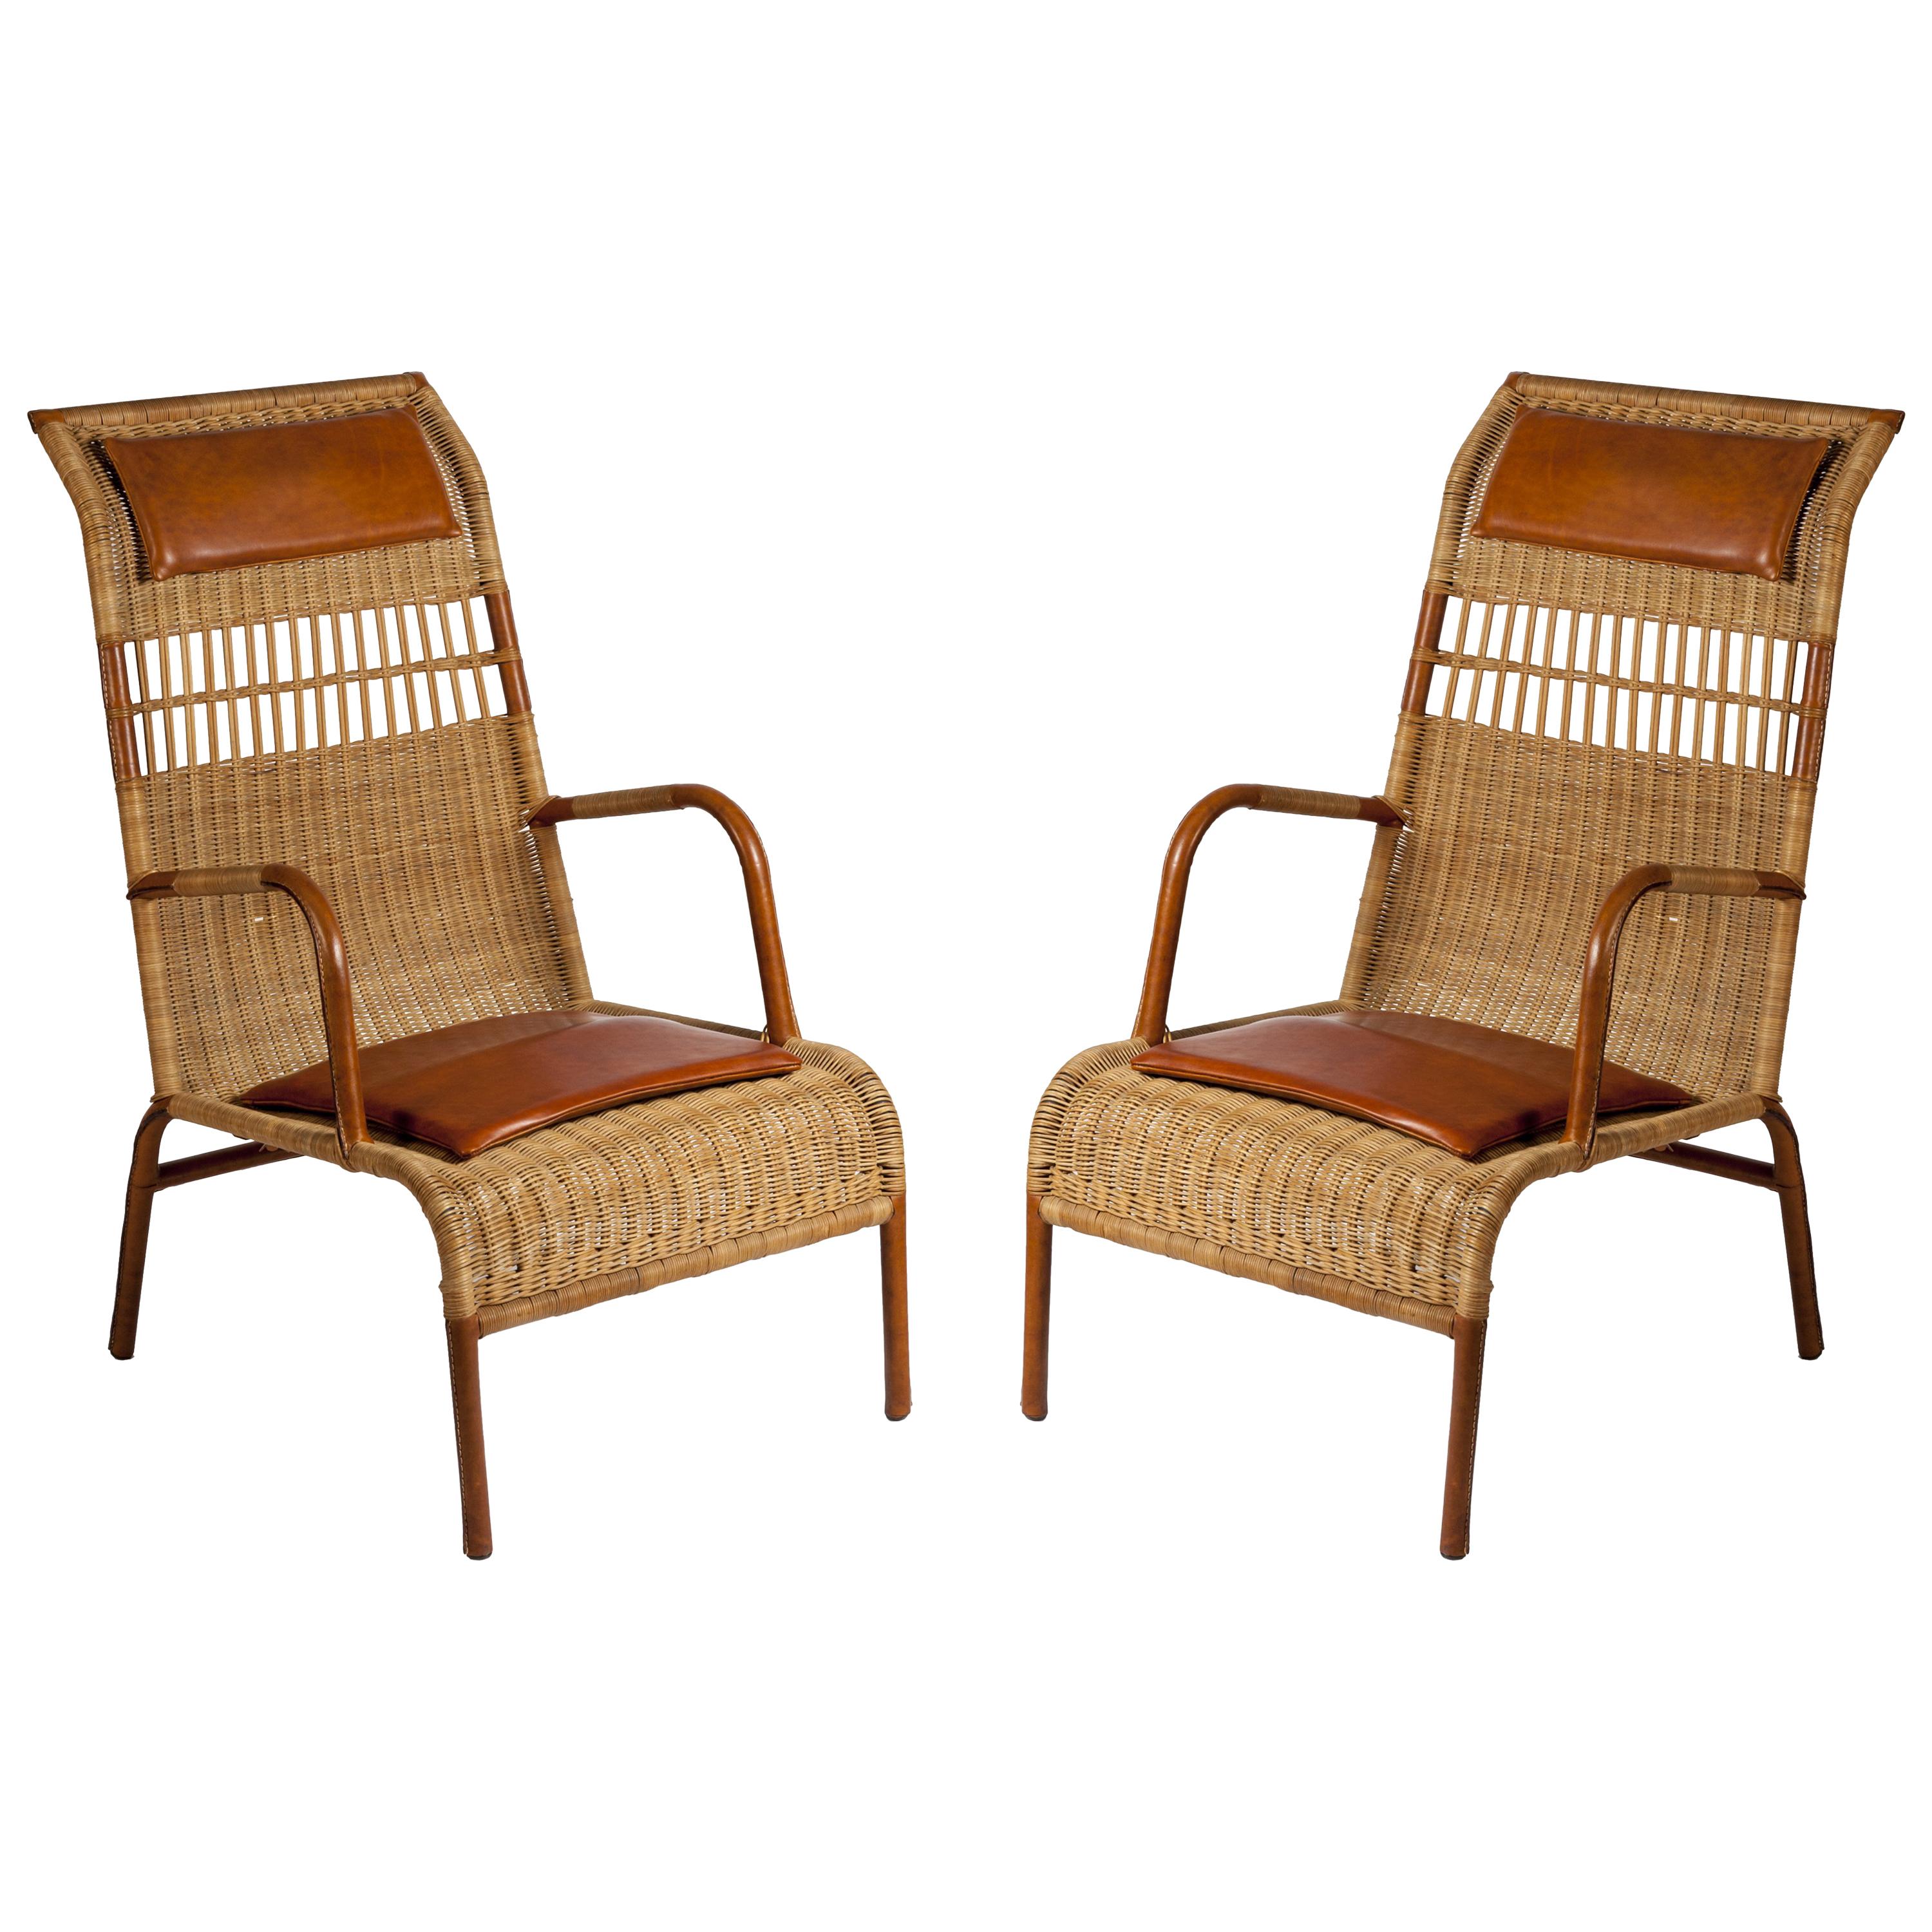 Pair of Stitched Leather and Rattan Armchairs by Jacques Adnet